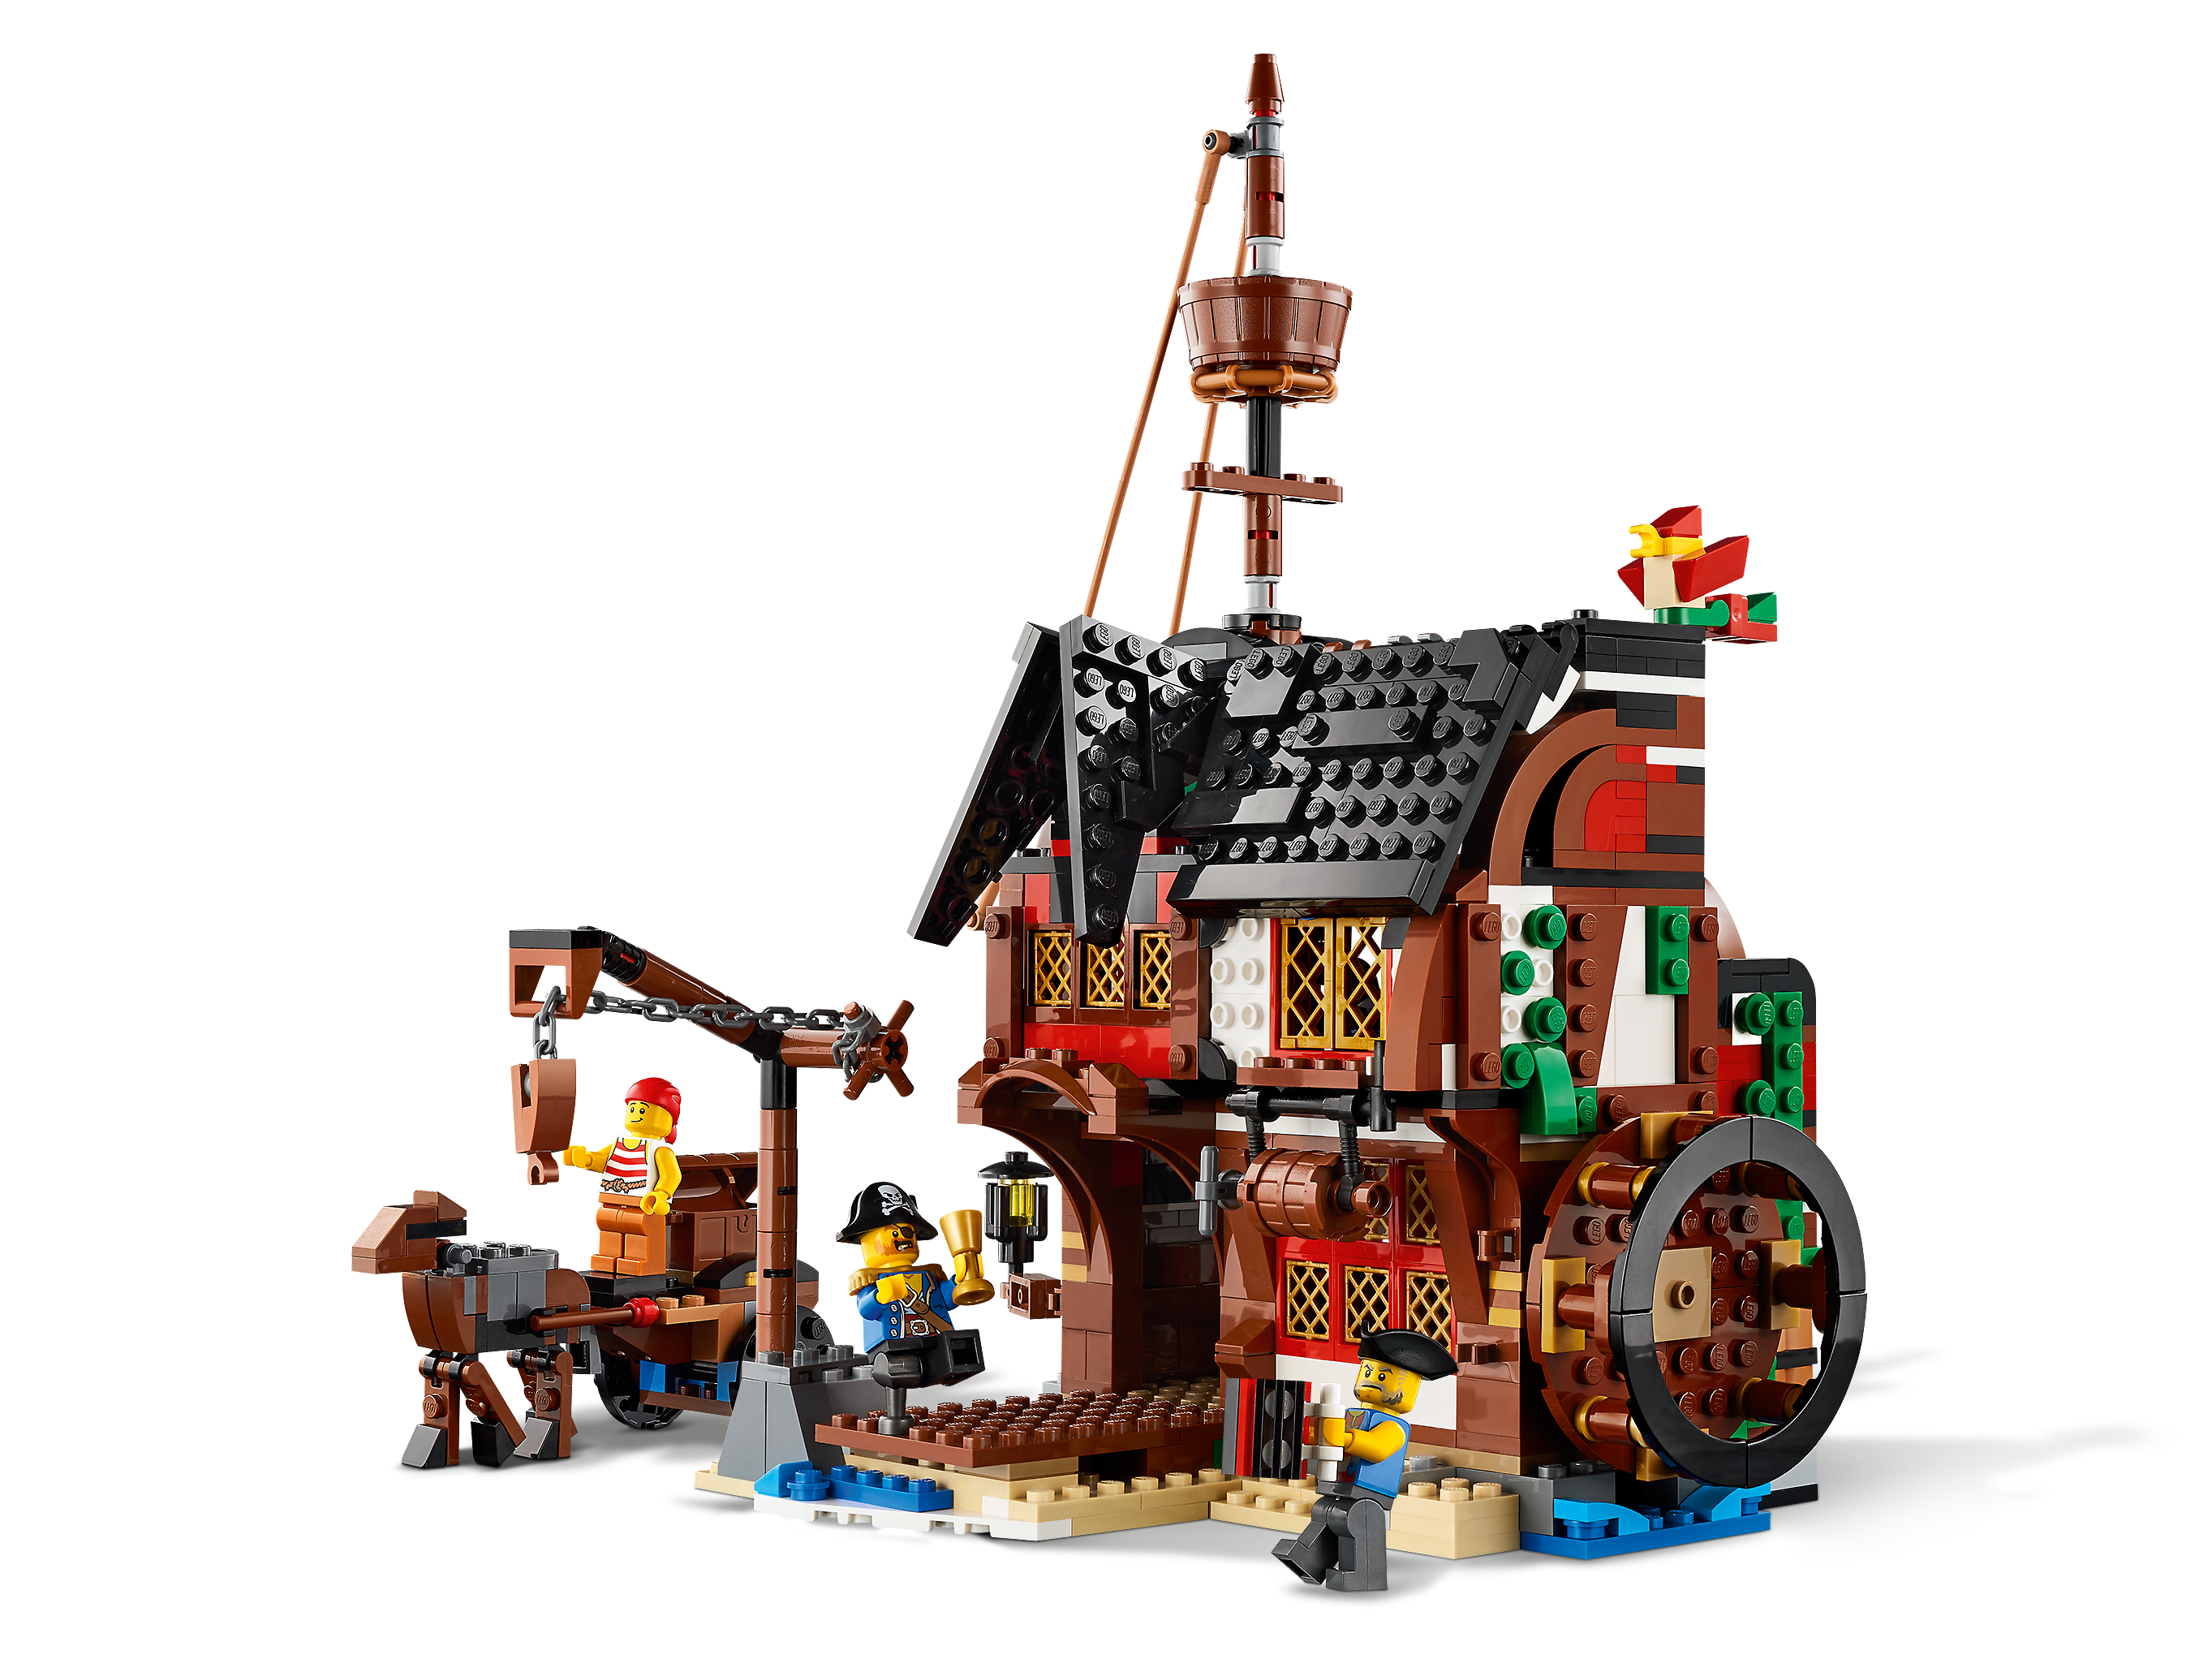 LEGO Pirate Ship LEGO Creator for sale online 31109 